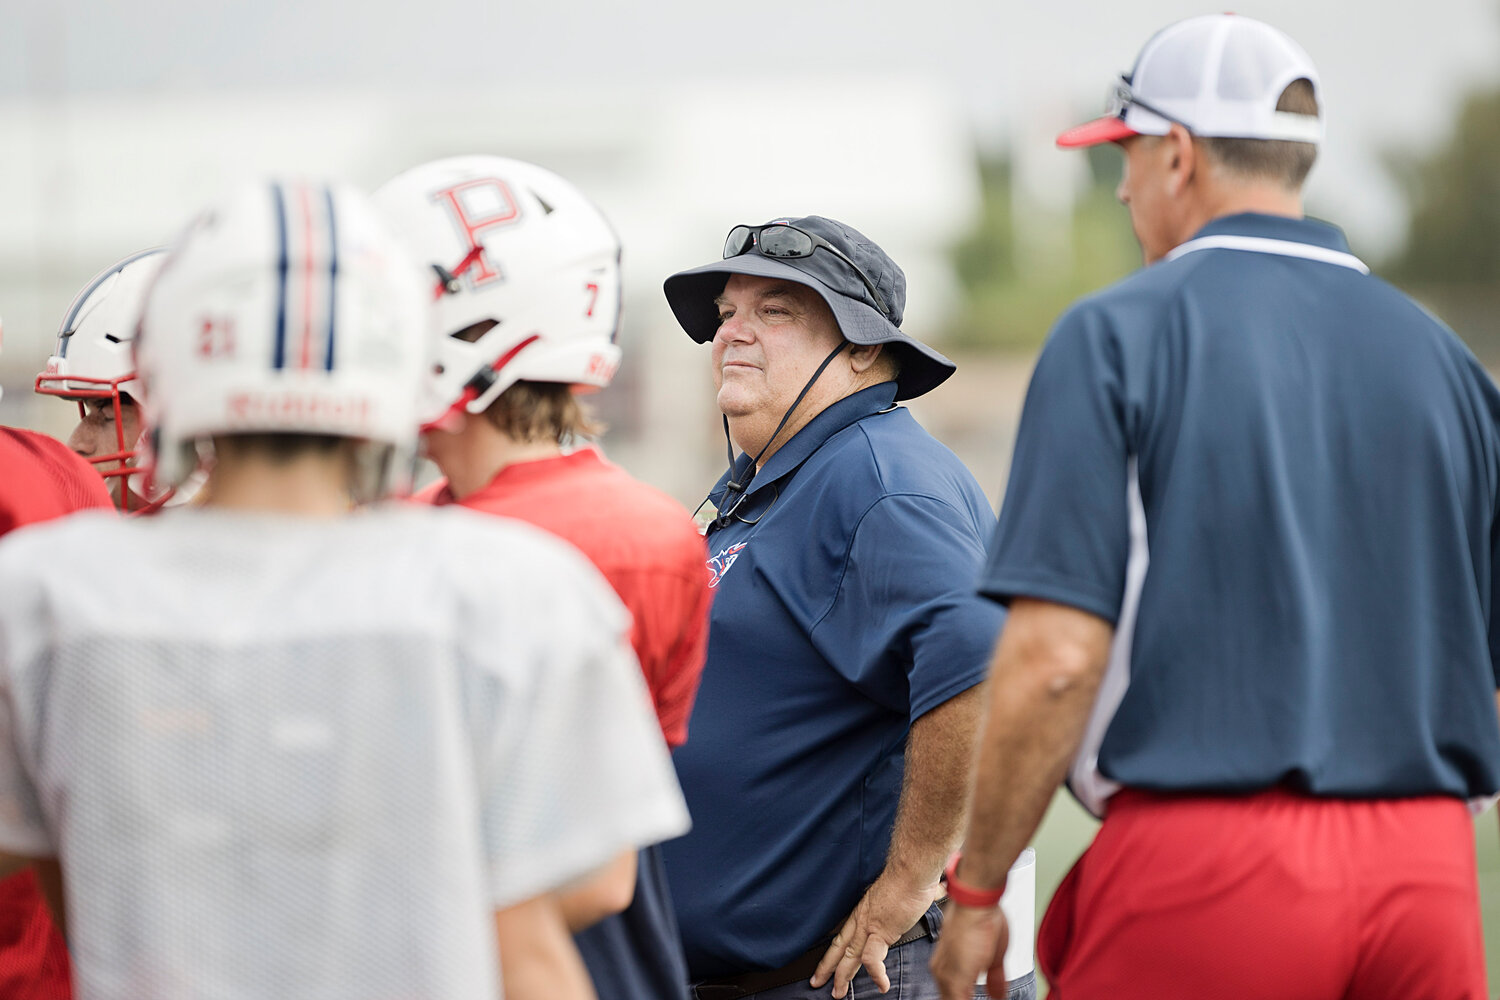 The Patriots’ new head coach, Keith MacDonald, watches over his players.